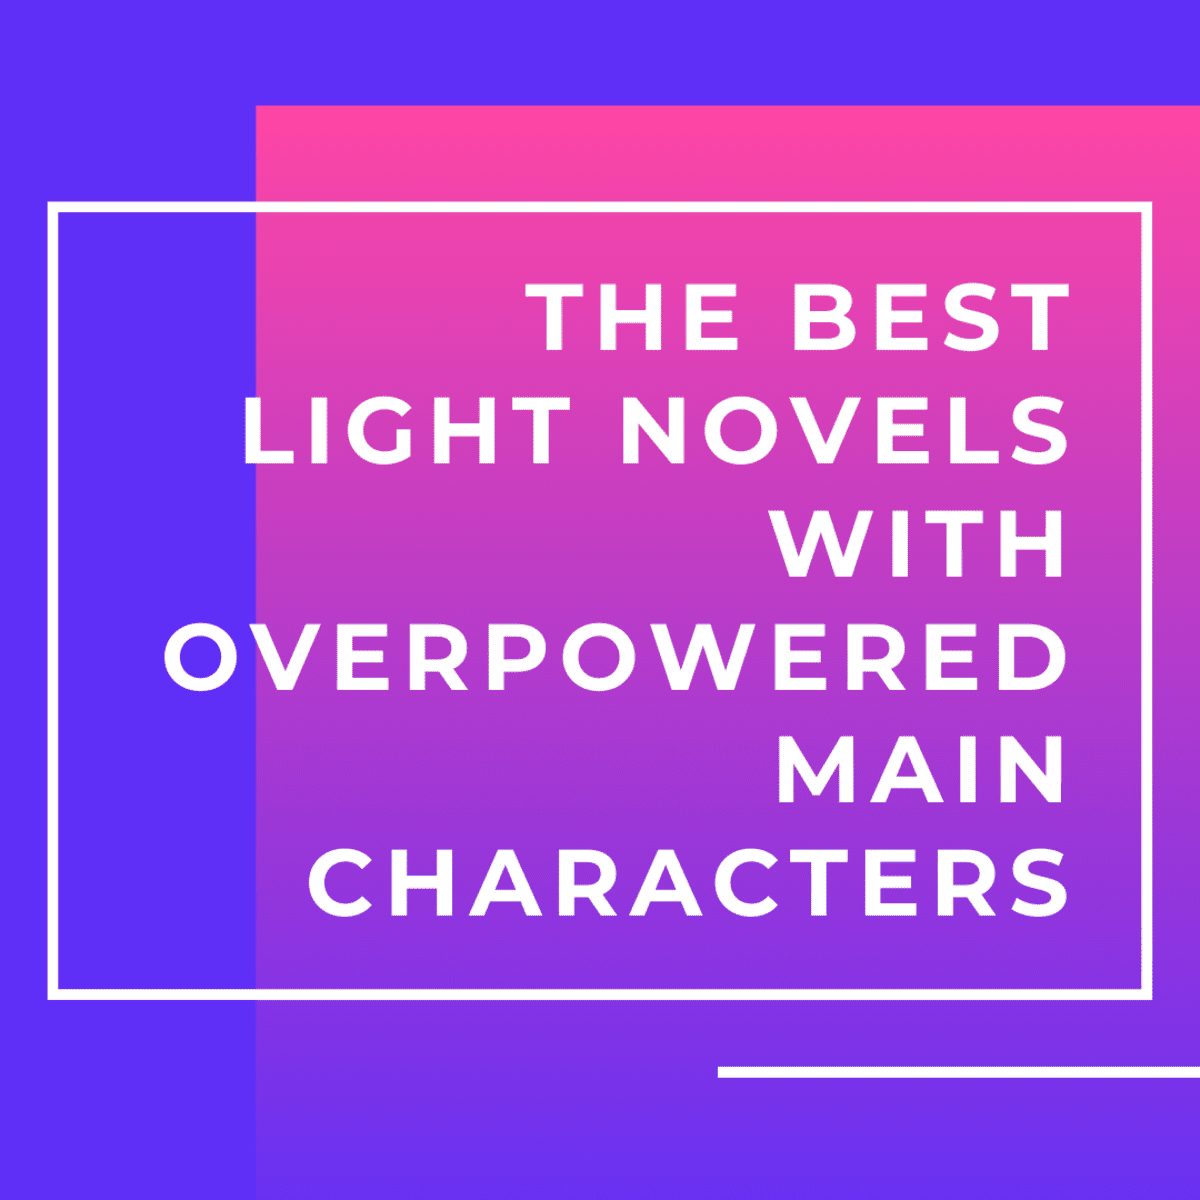 The Top 15 Novels With Overpowered Main Characters - HobbyLark